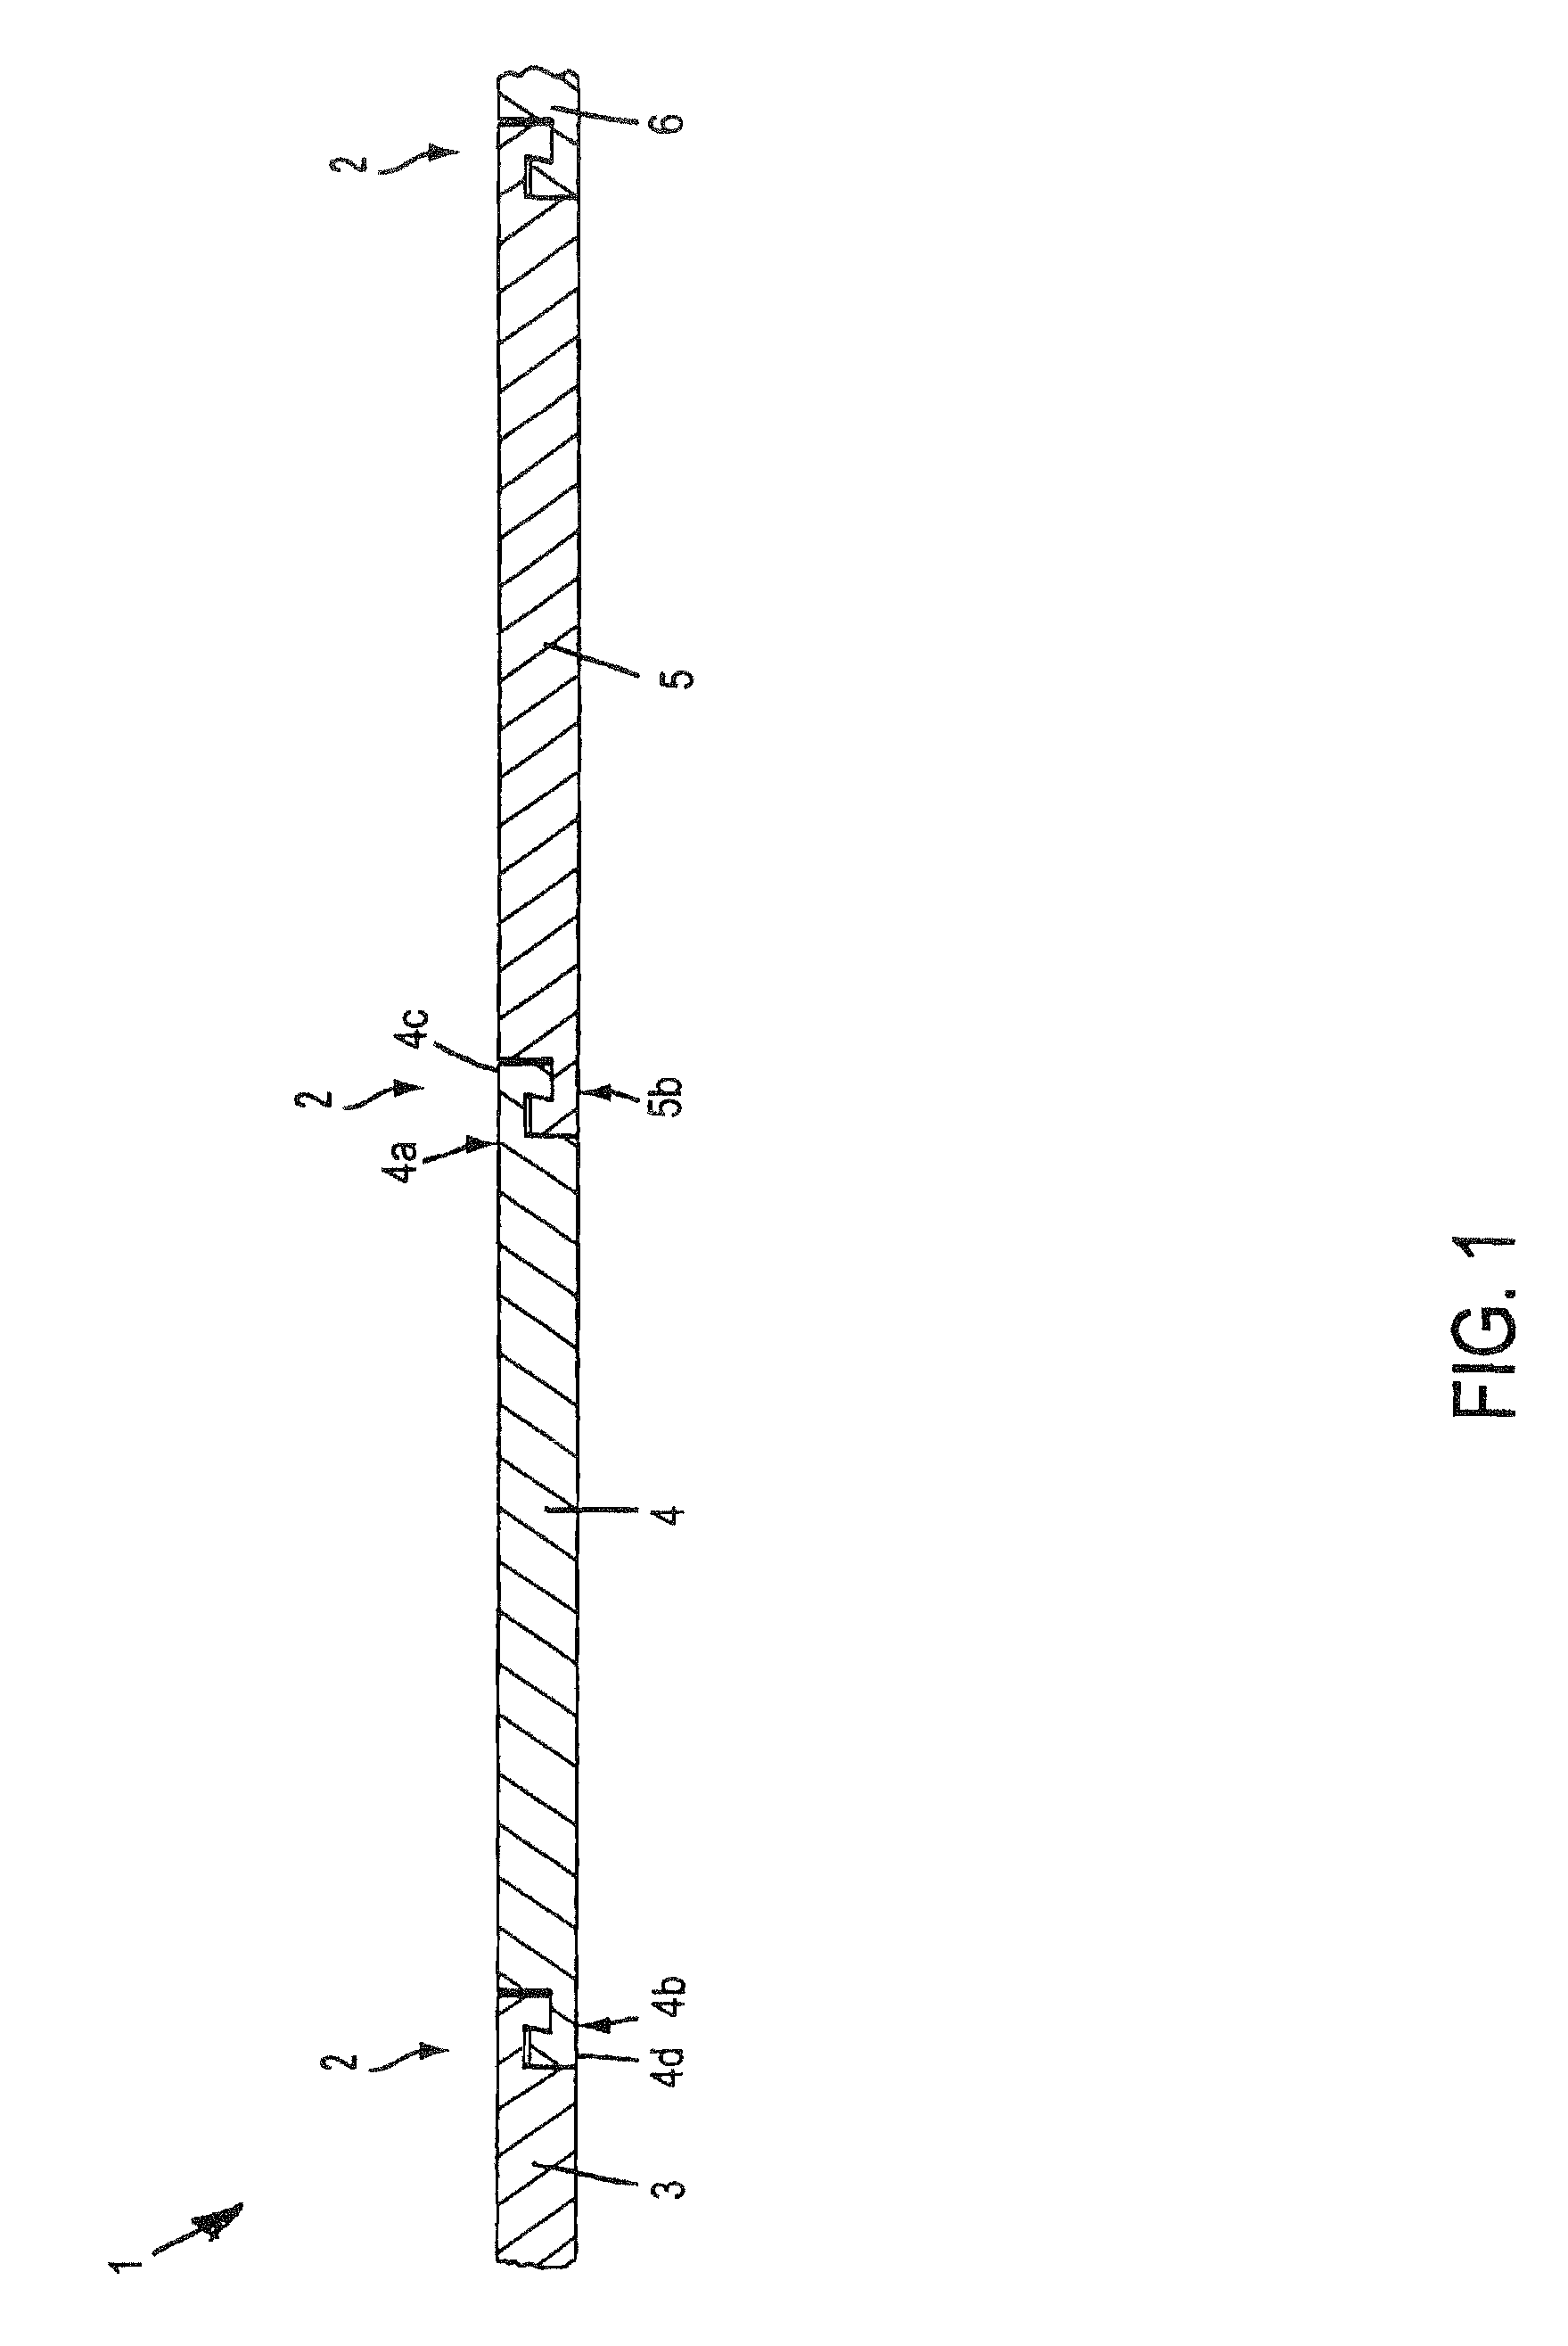 Panel and panel fastening system